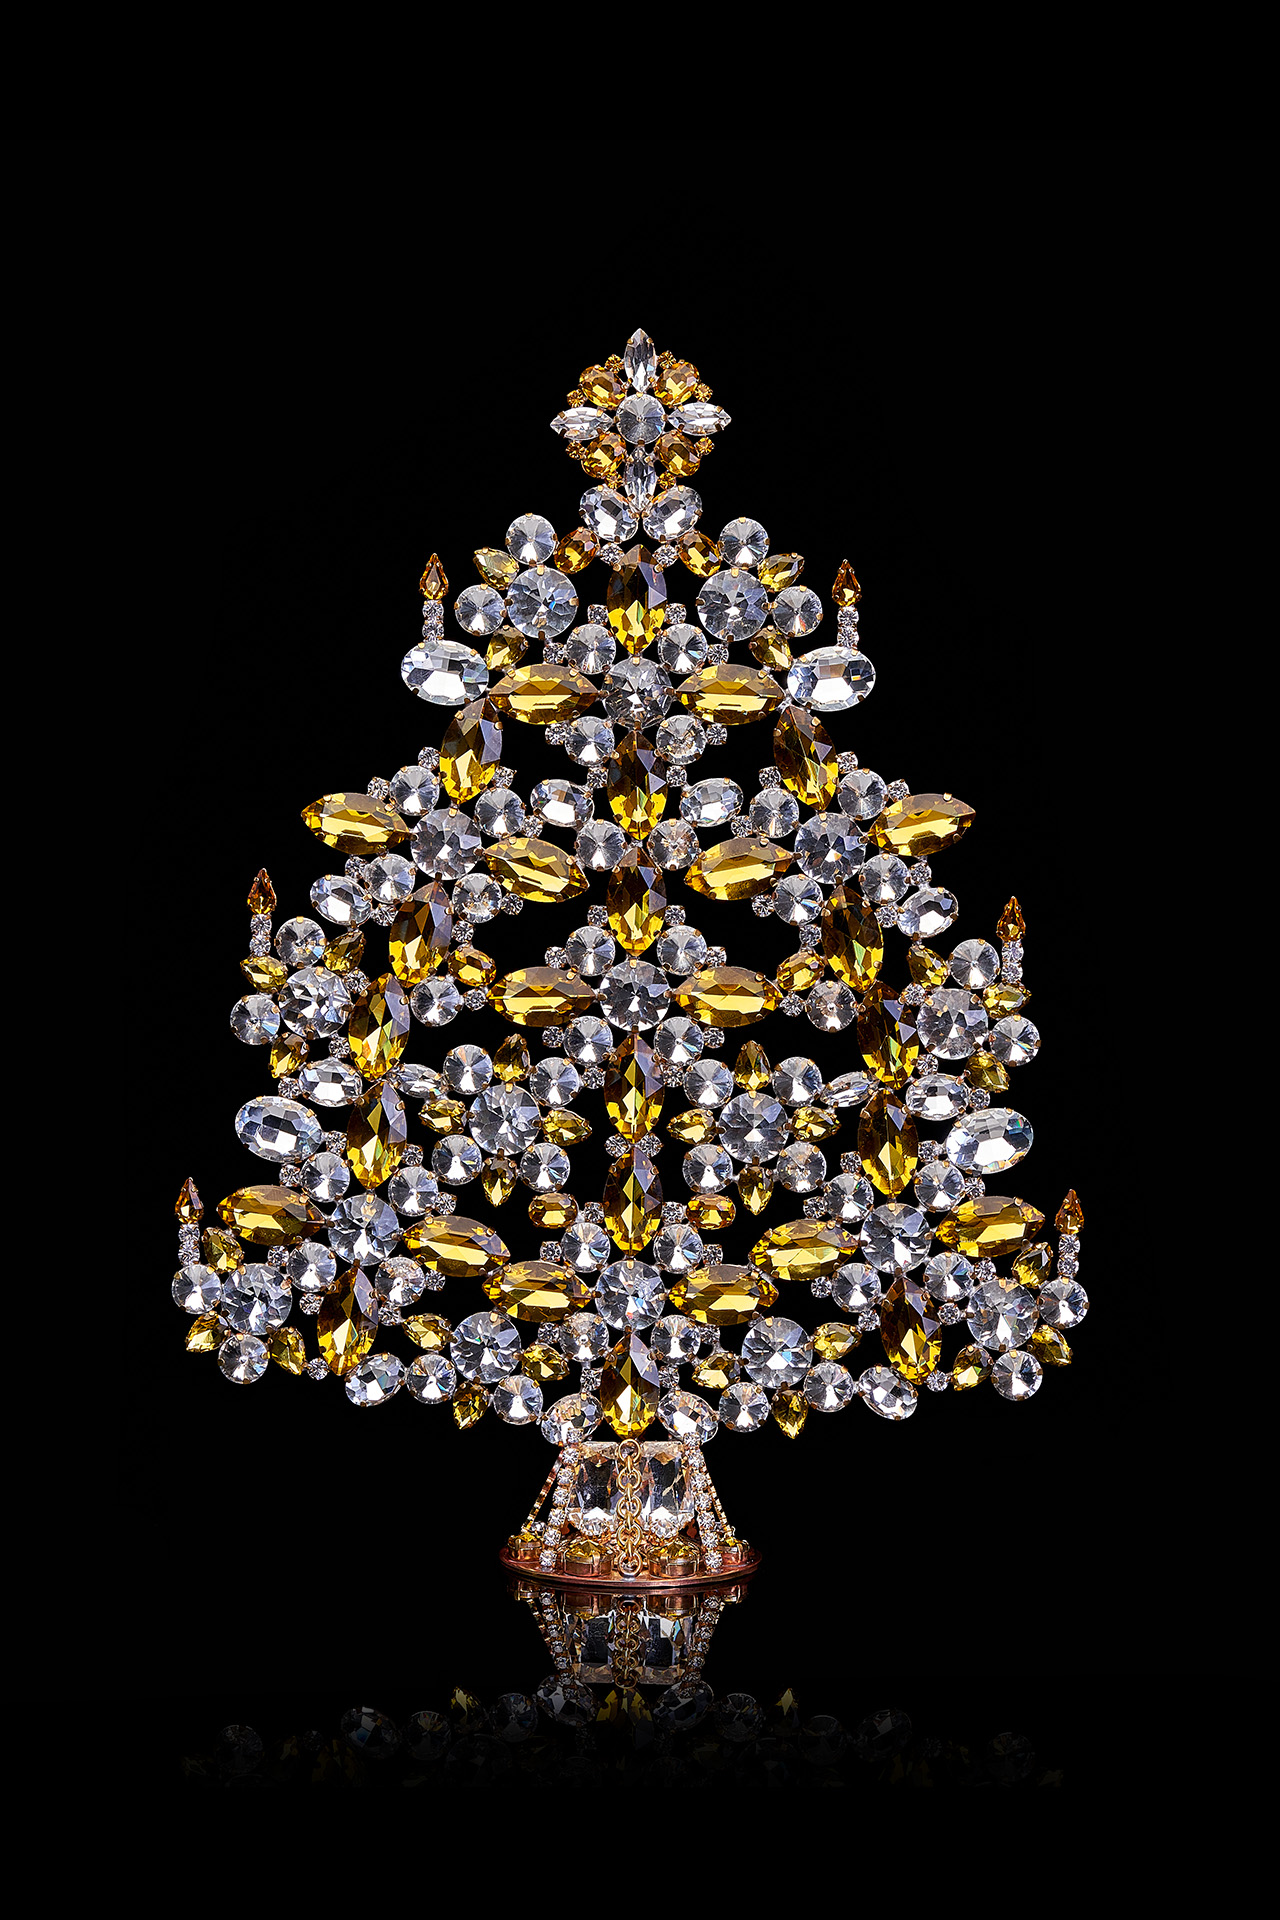 Vintage Czech tabletop Christmas tree - with yellow ornaments